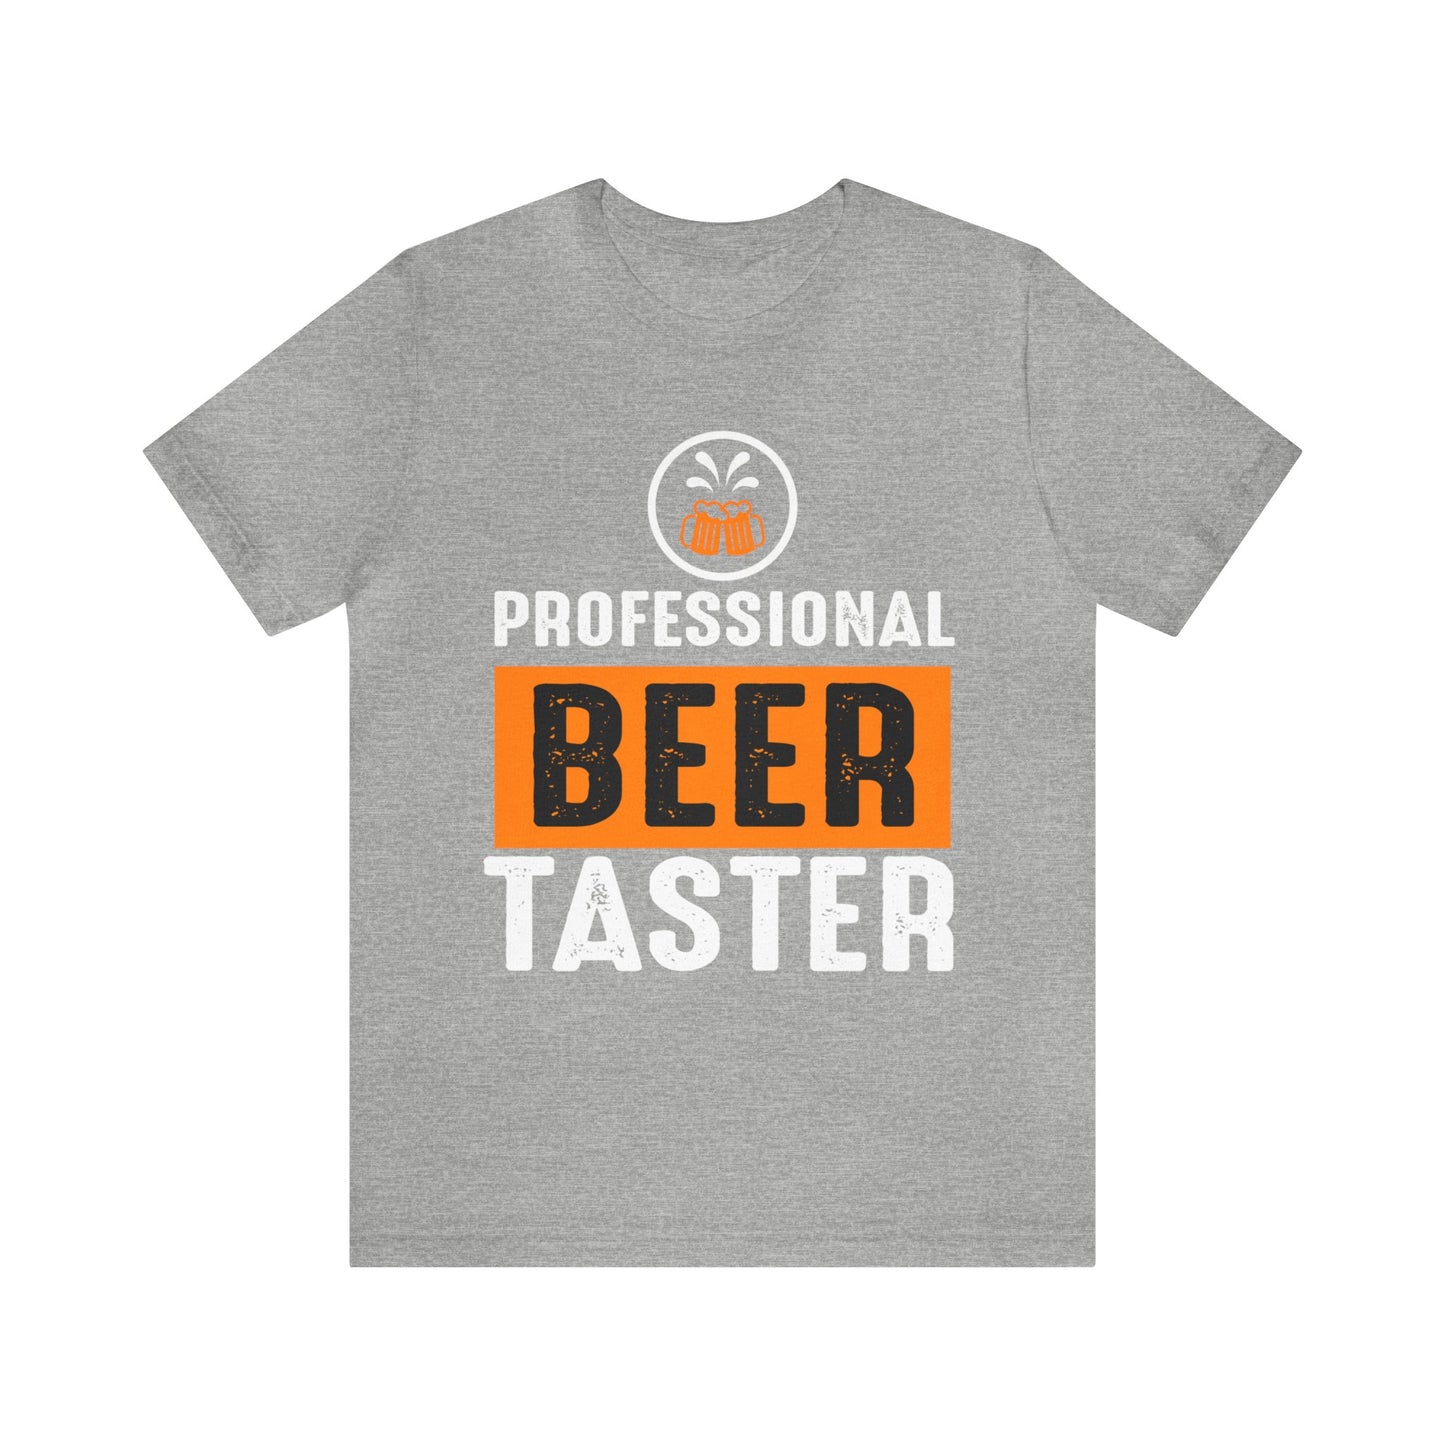 Professional Beer Taster Tee for Brew Enthusiasts